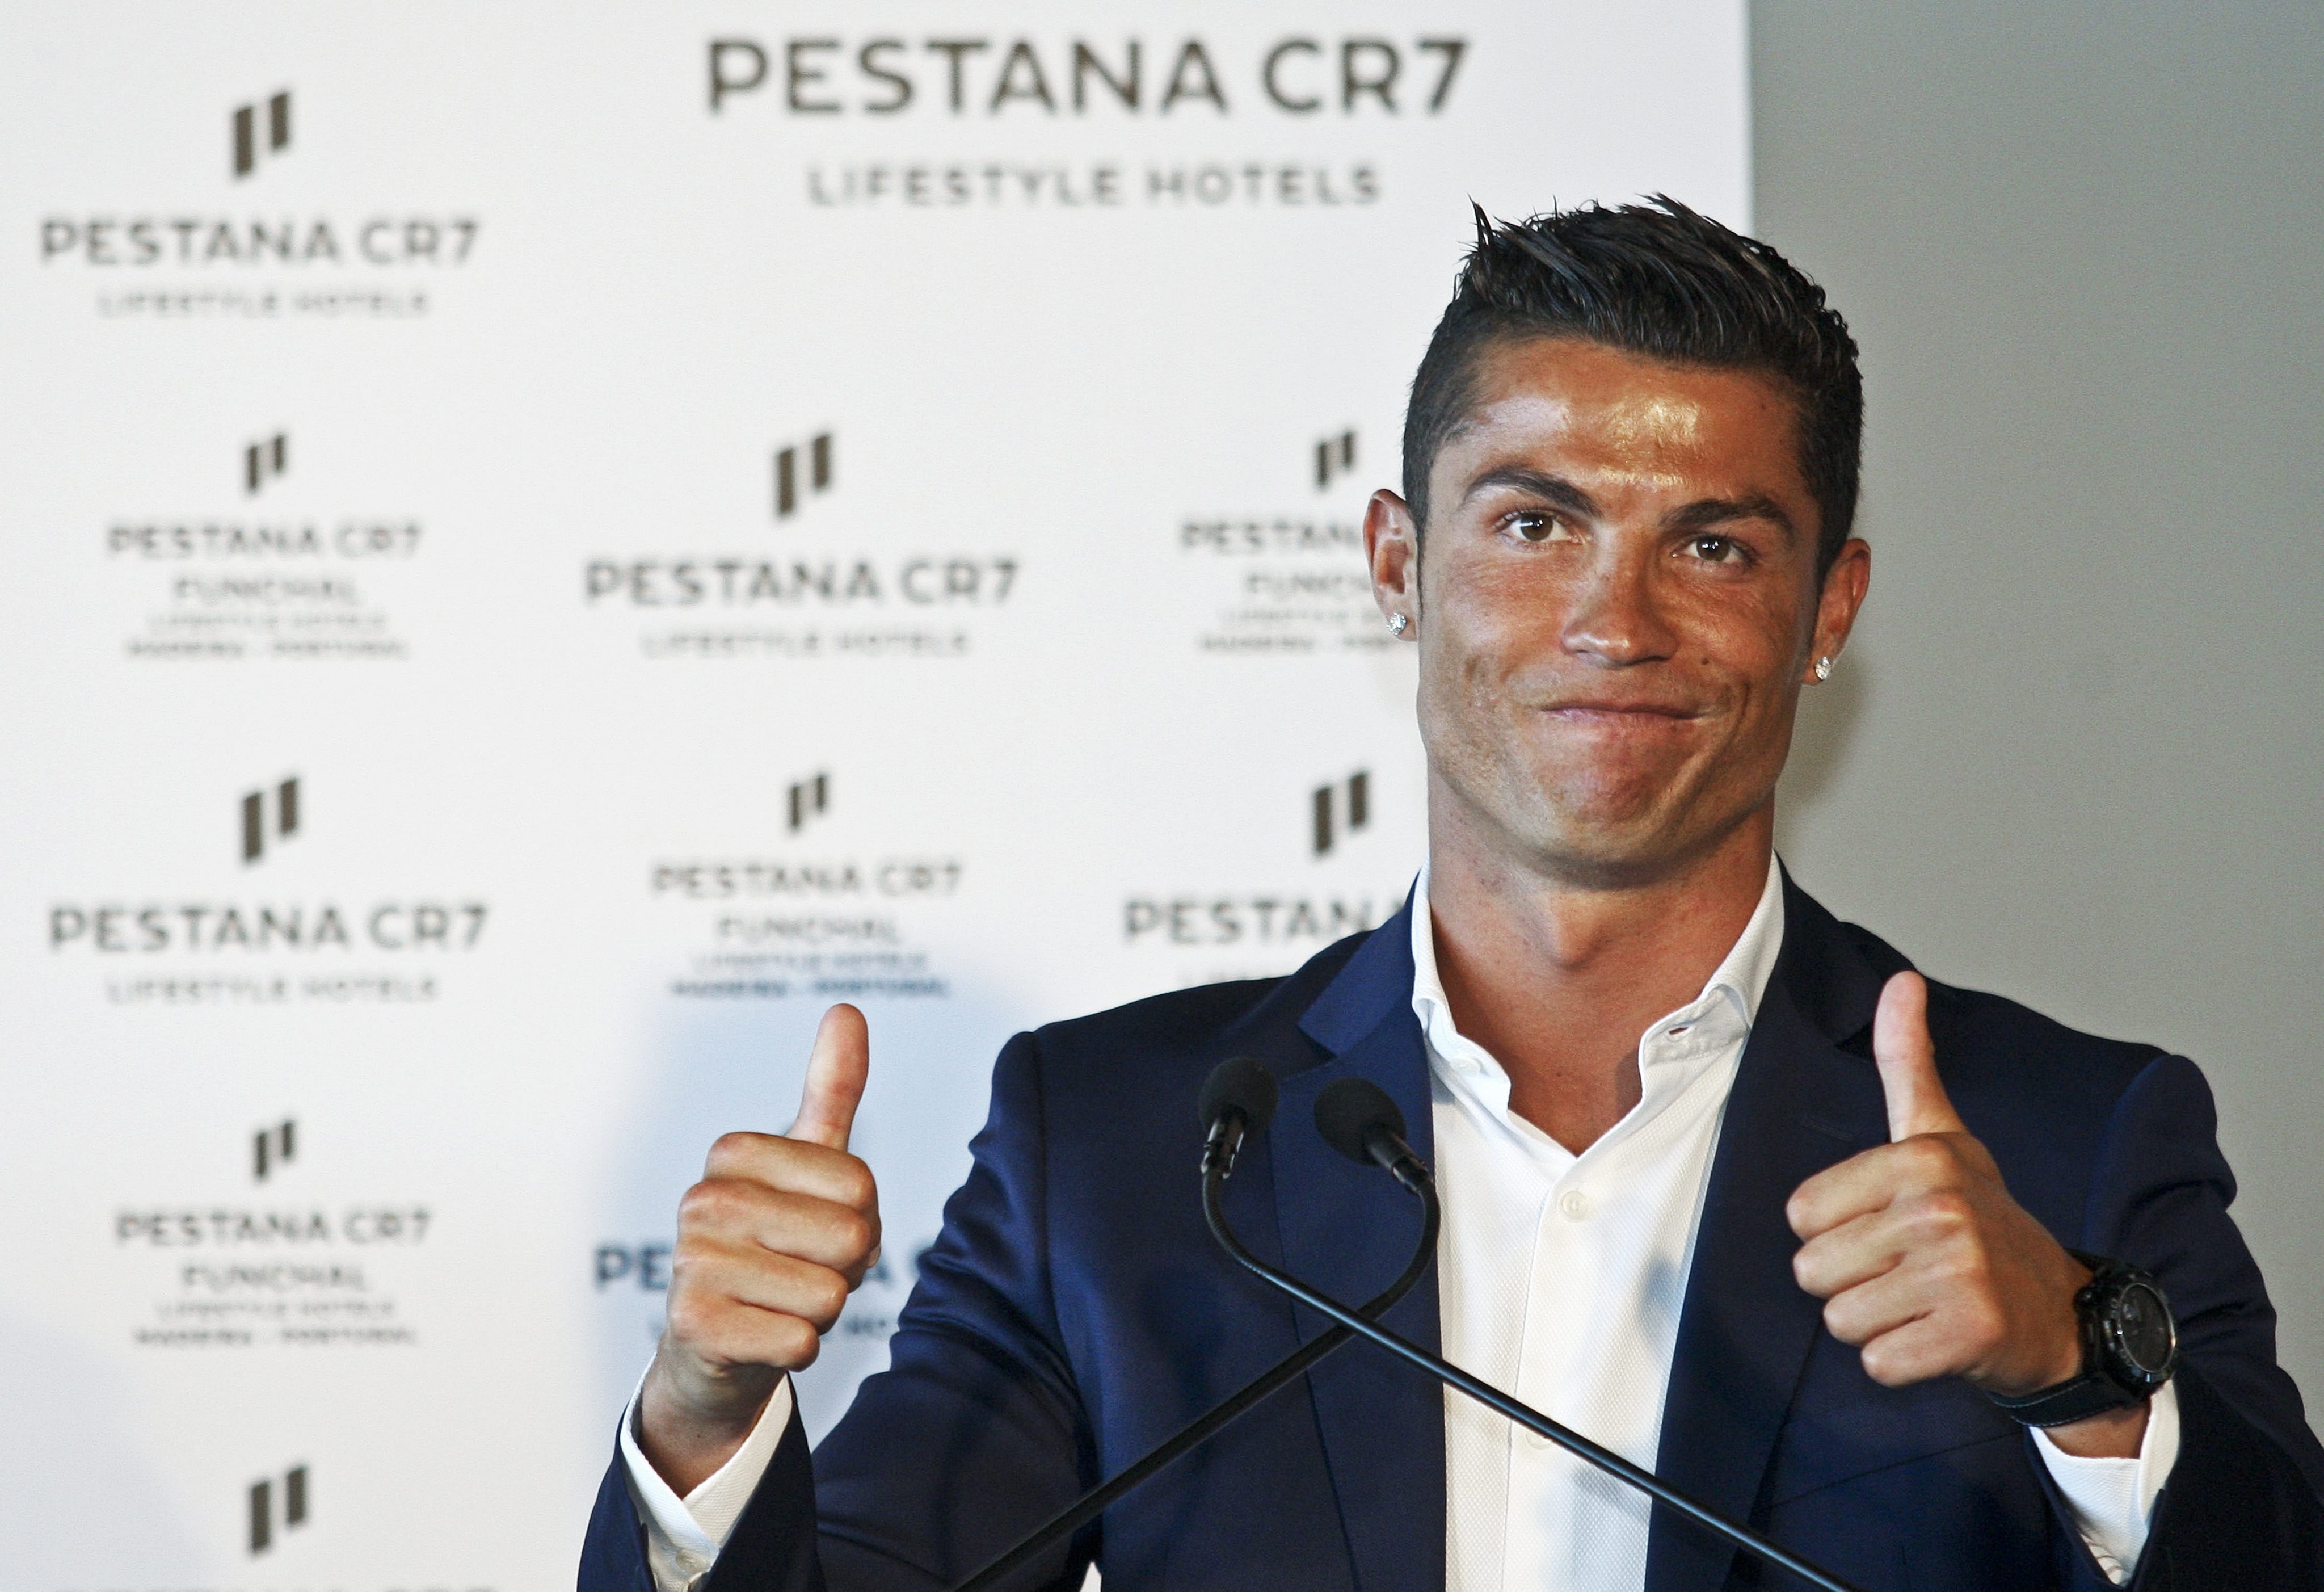 2016-07-22 17:44:54 epa05437160 Portuguese soccer player Cristiano Ronaldo at the opening of the first of four Hotels as a partnership between the Pestana Hotel Group and Cristiano Ronaldo, July 22, 2016. The hotel is already operating since July 1, Funchal, Portugal, July 22. EPA/HOMEM DE GOUVEIA